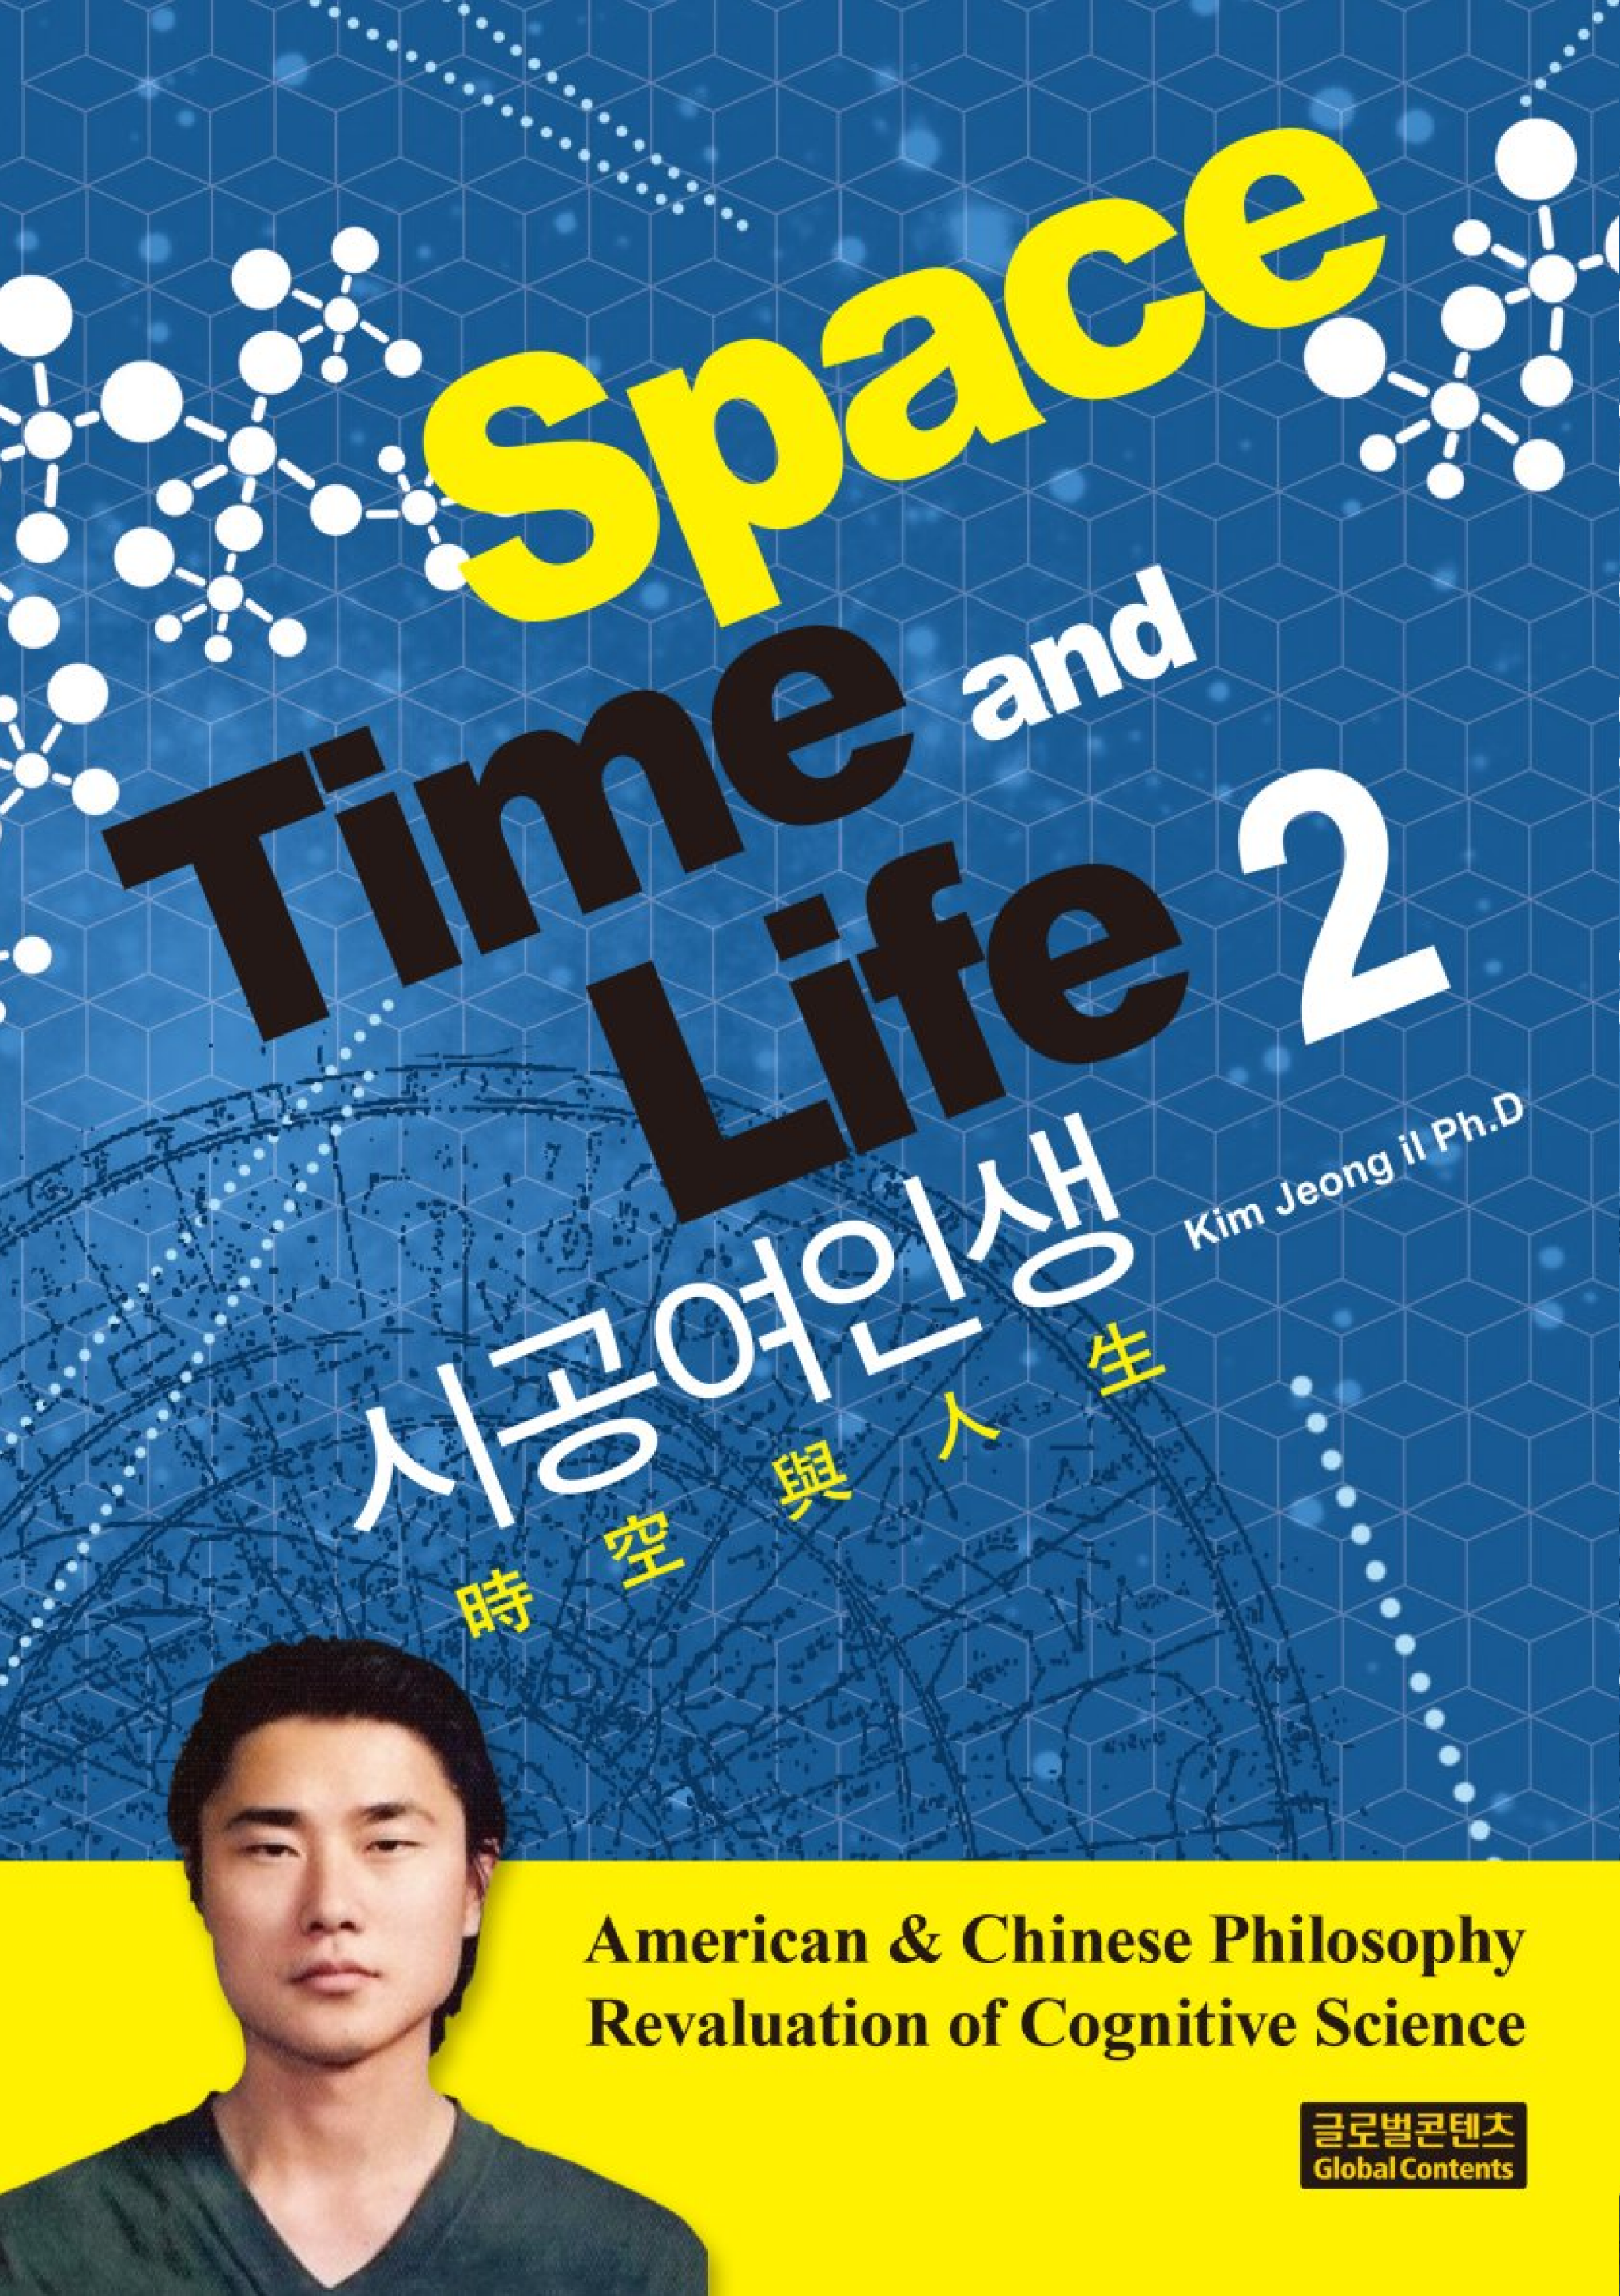 Space Time and Life 2 (시공여인생)